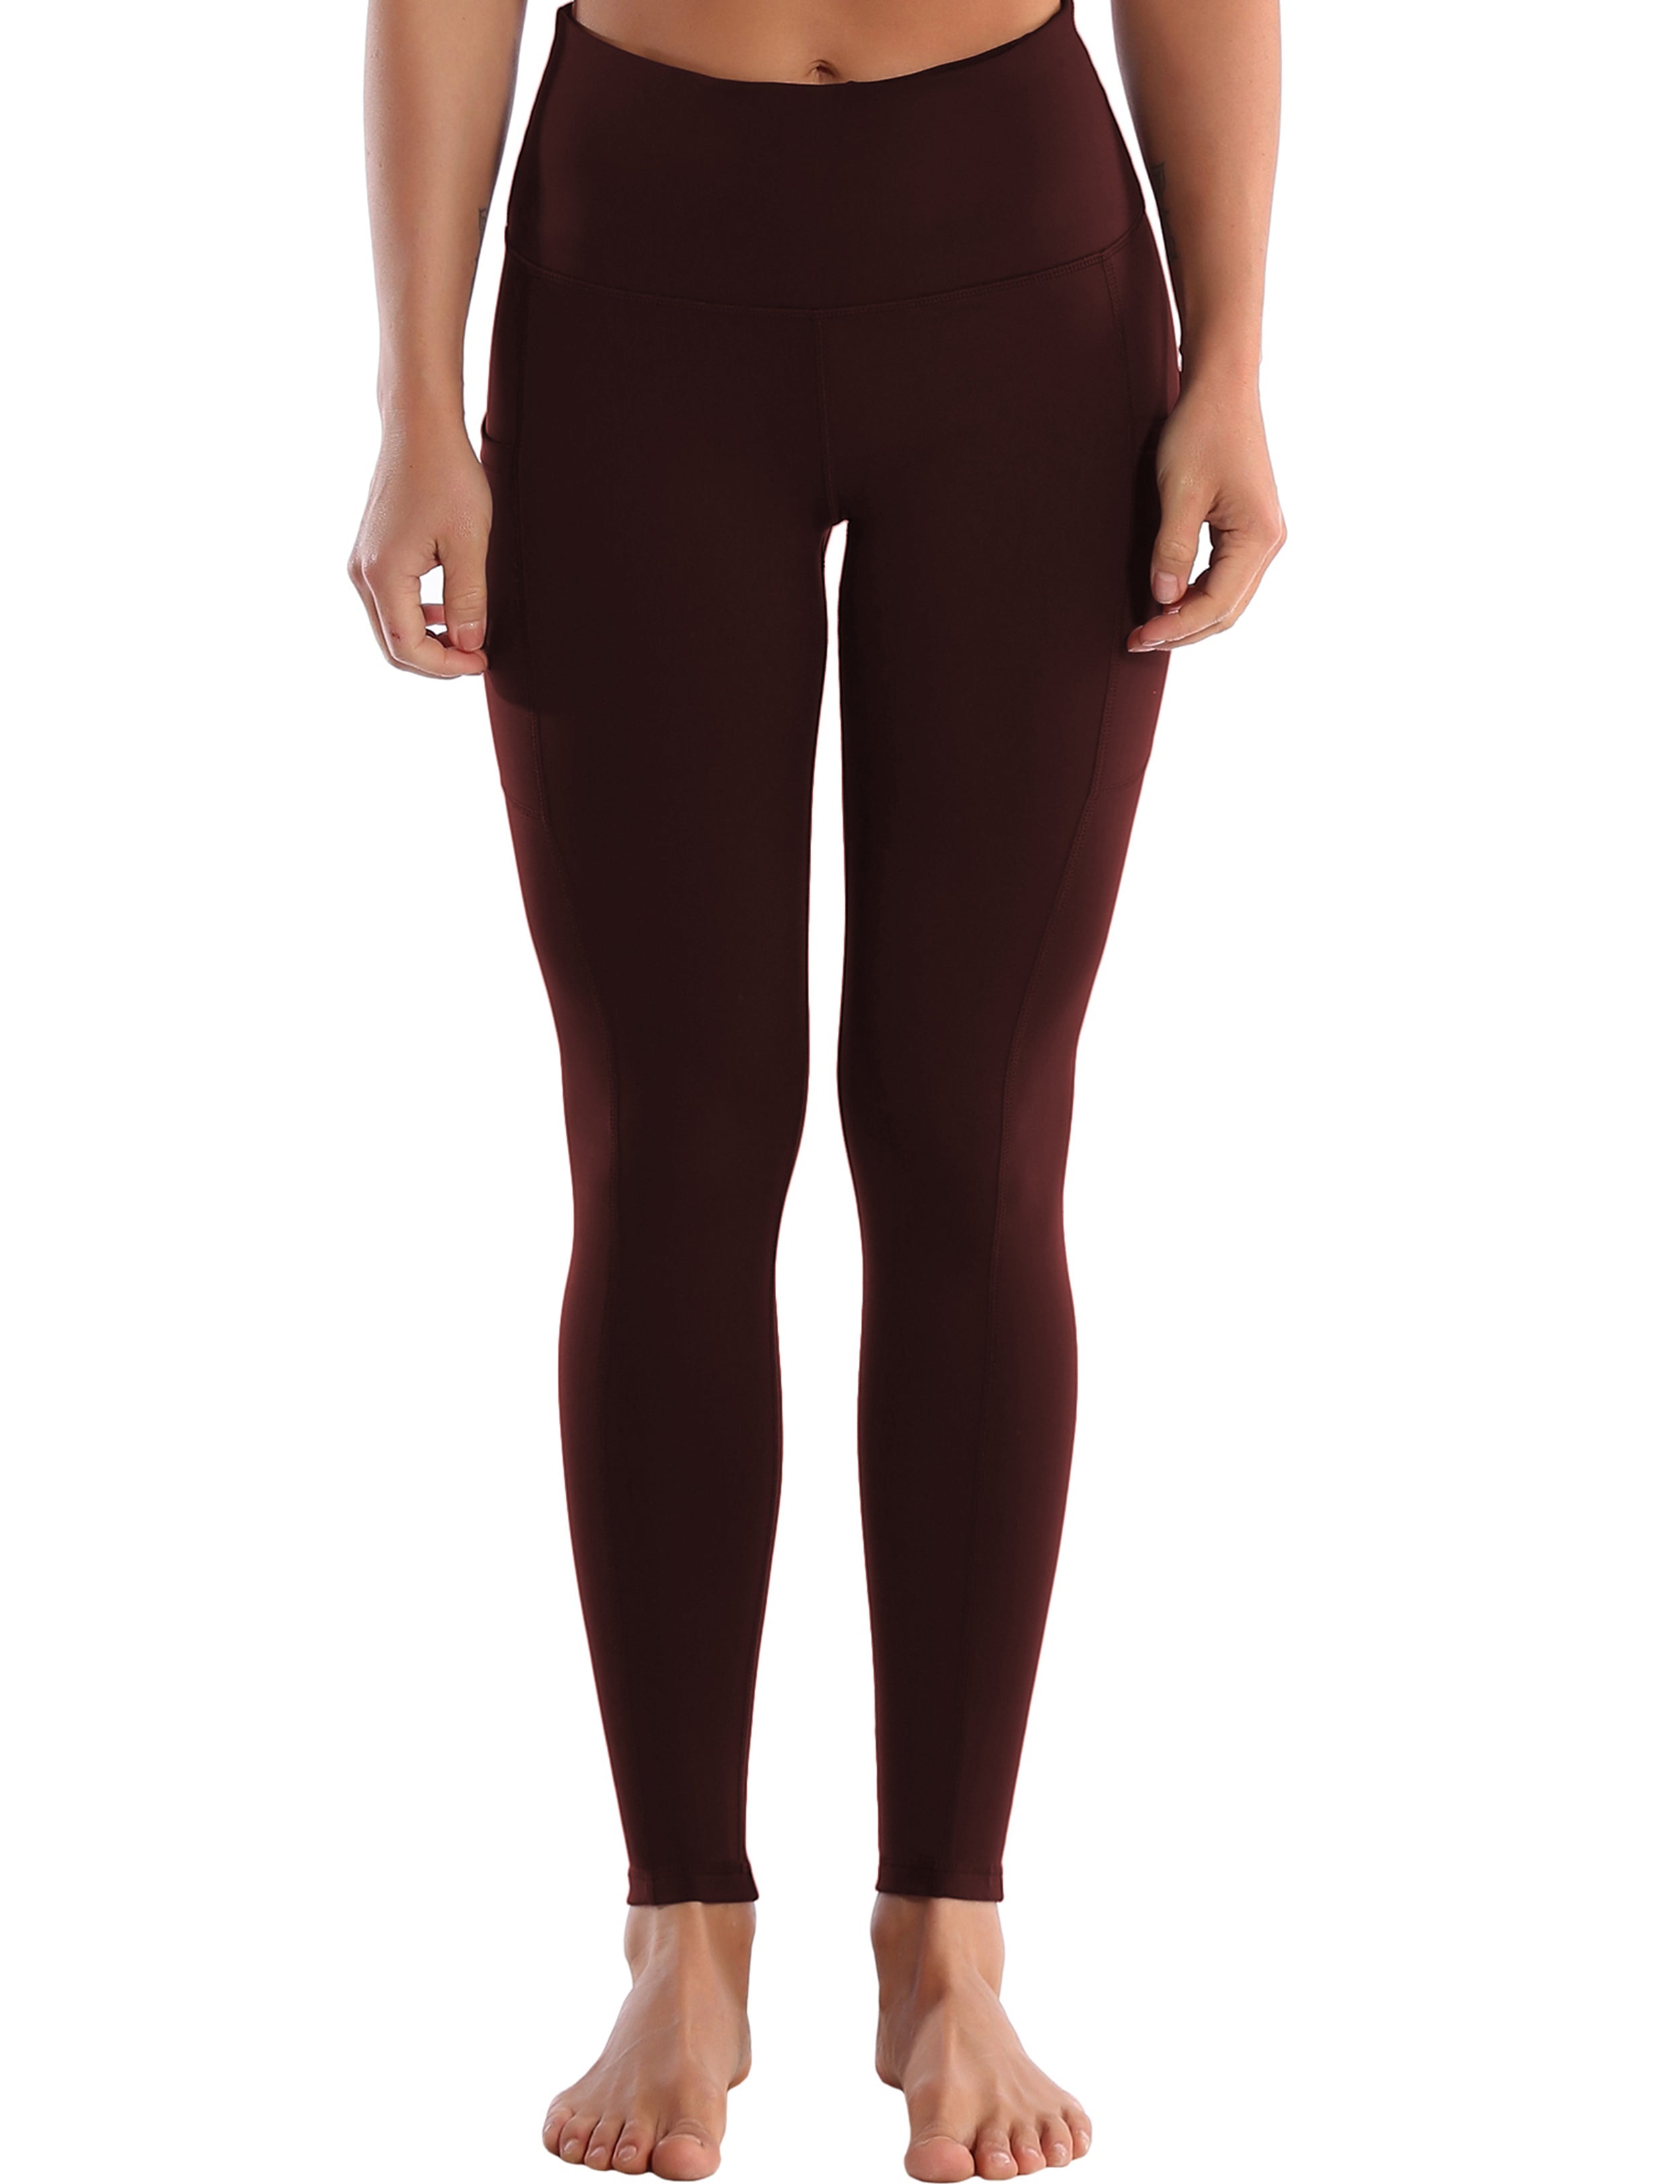 Hip Line Side Pockets Gym Pants mahoganymaroon Sexy Hip Line Side Pockets 75%Nylon/25%Spandex Fabric doesn't attract lint easily 4-way stretch No see-through Moisture-wicking Tummy control Inner pocket Two lengths